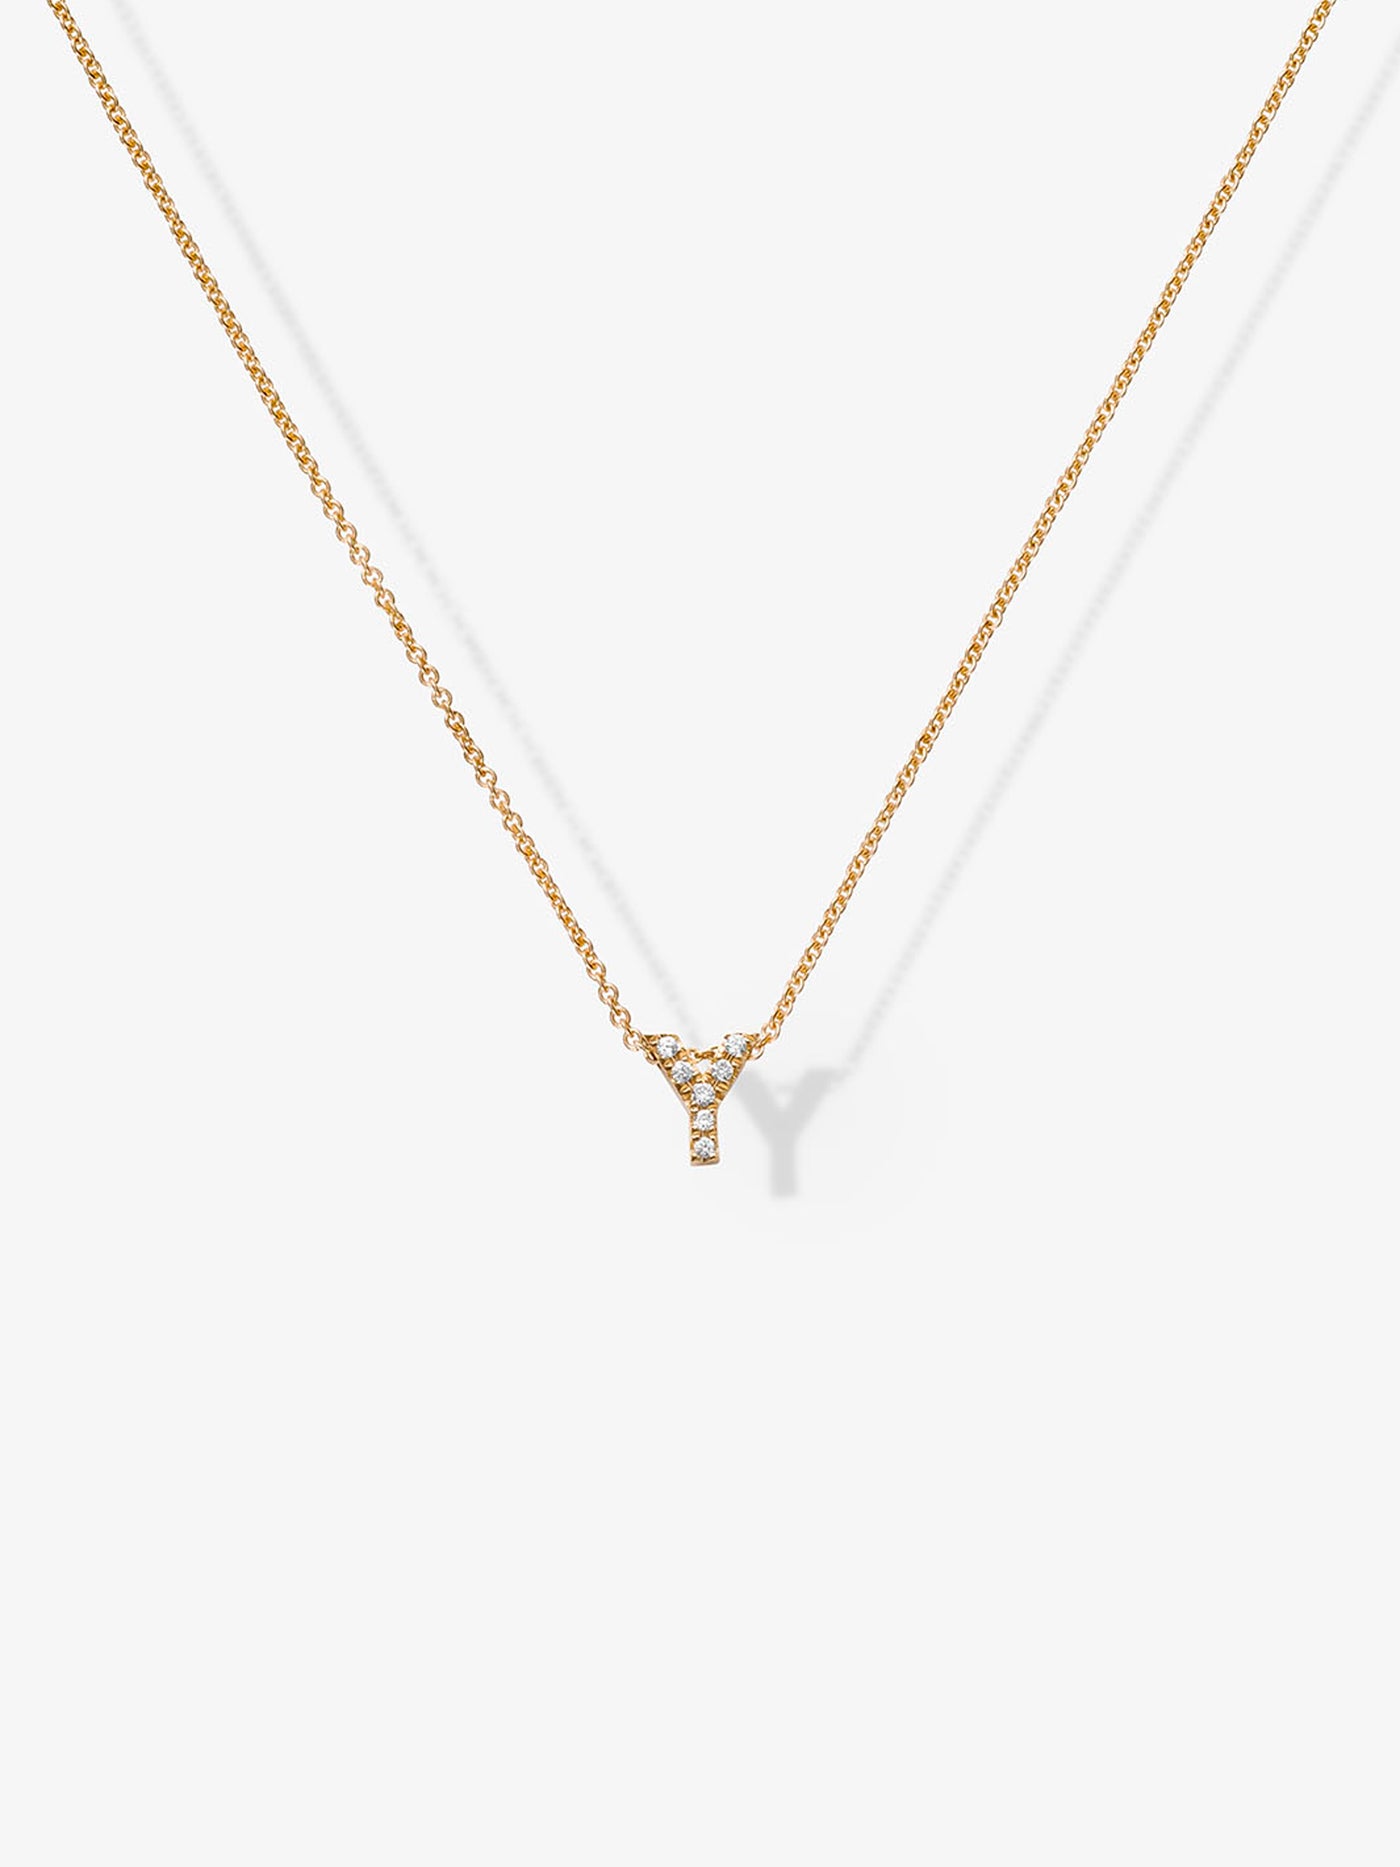 Letter Y Necklace in Diamonds and 18k Gold